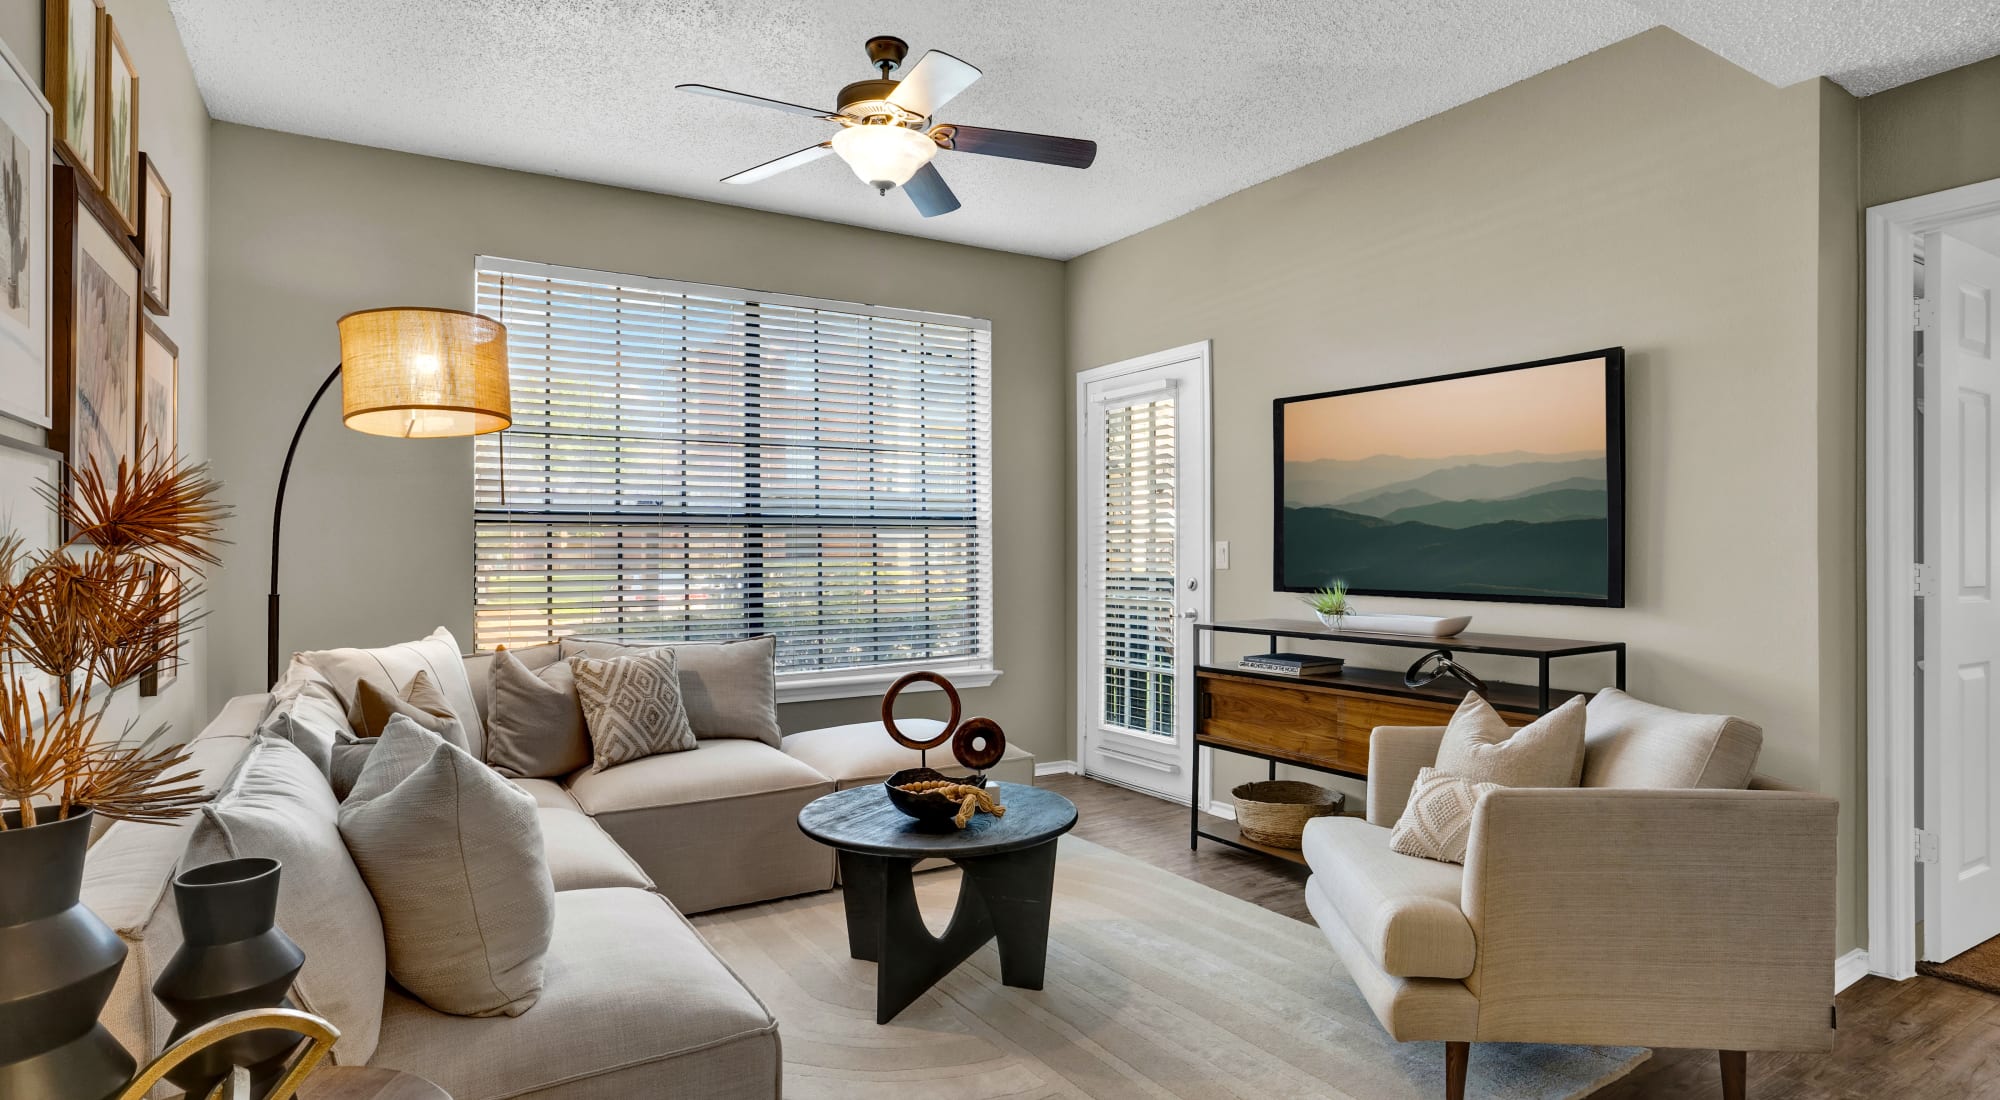 Living Room with ceiling fan at Carrollton Park of North Dallas